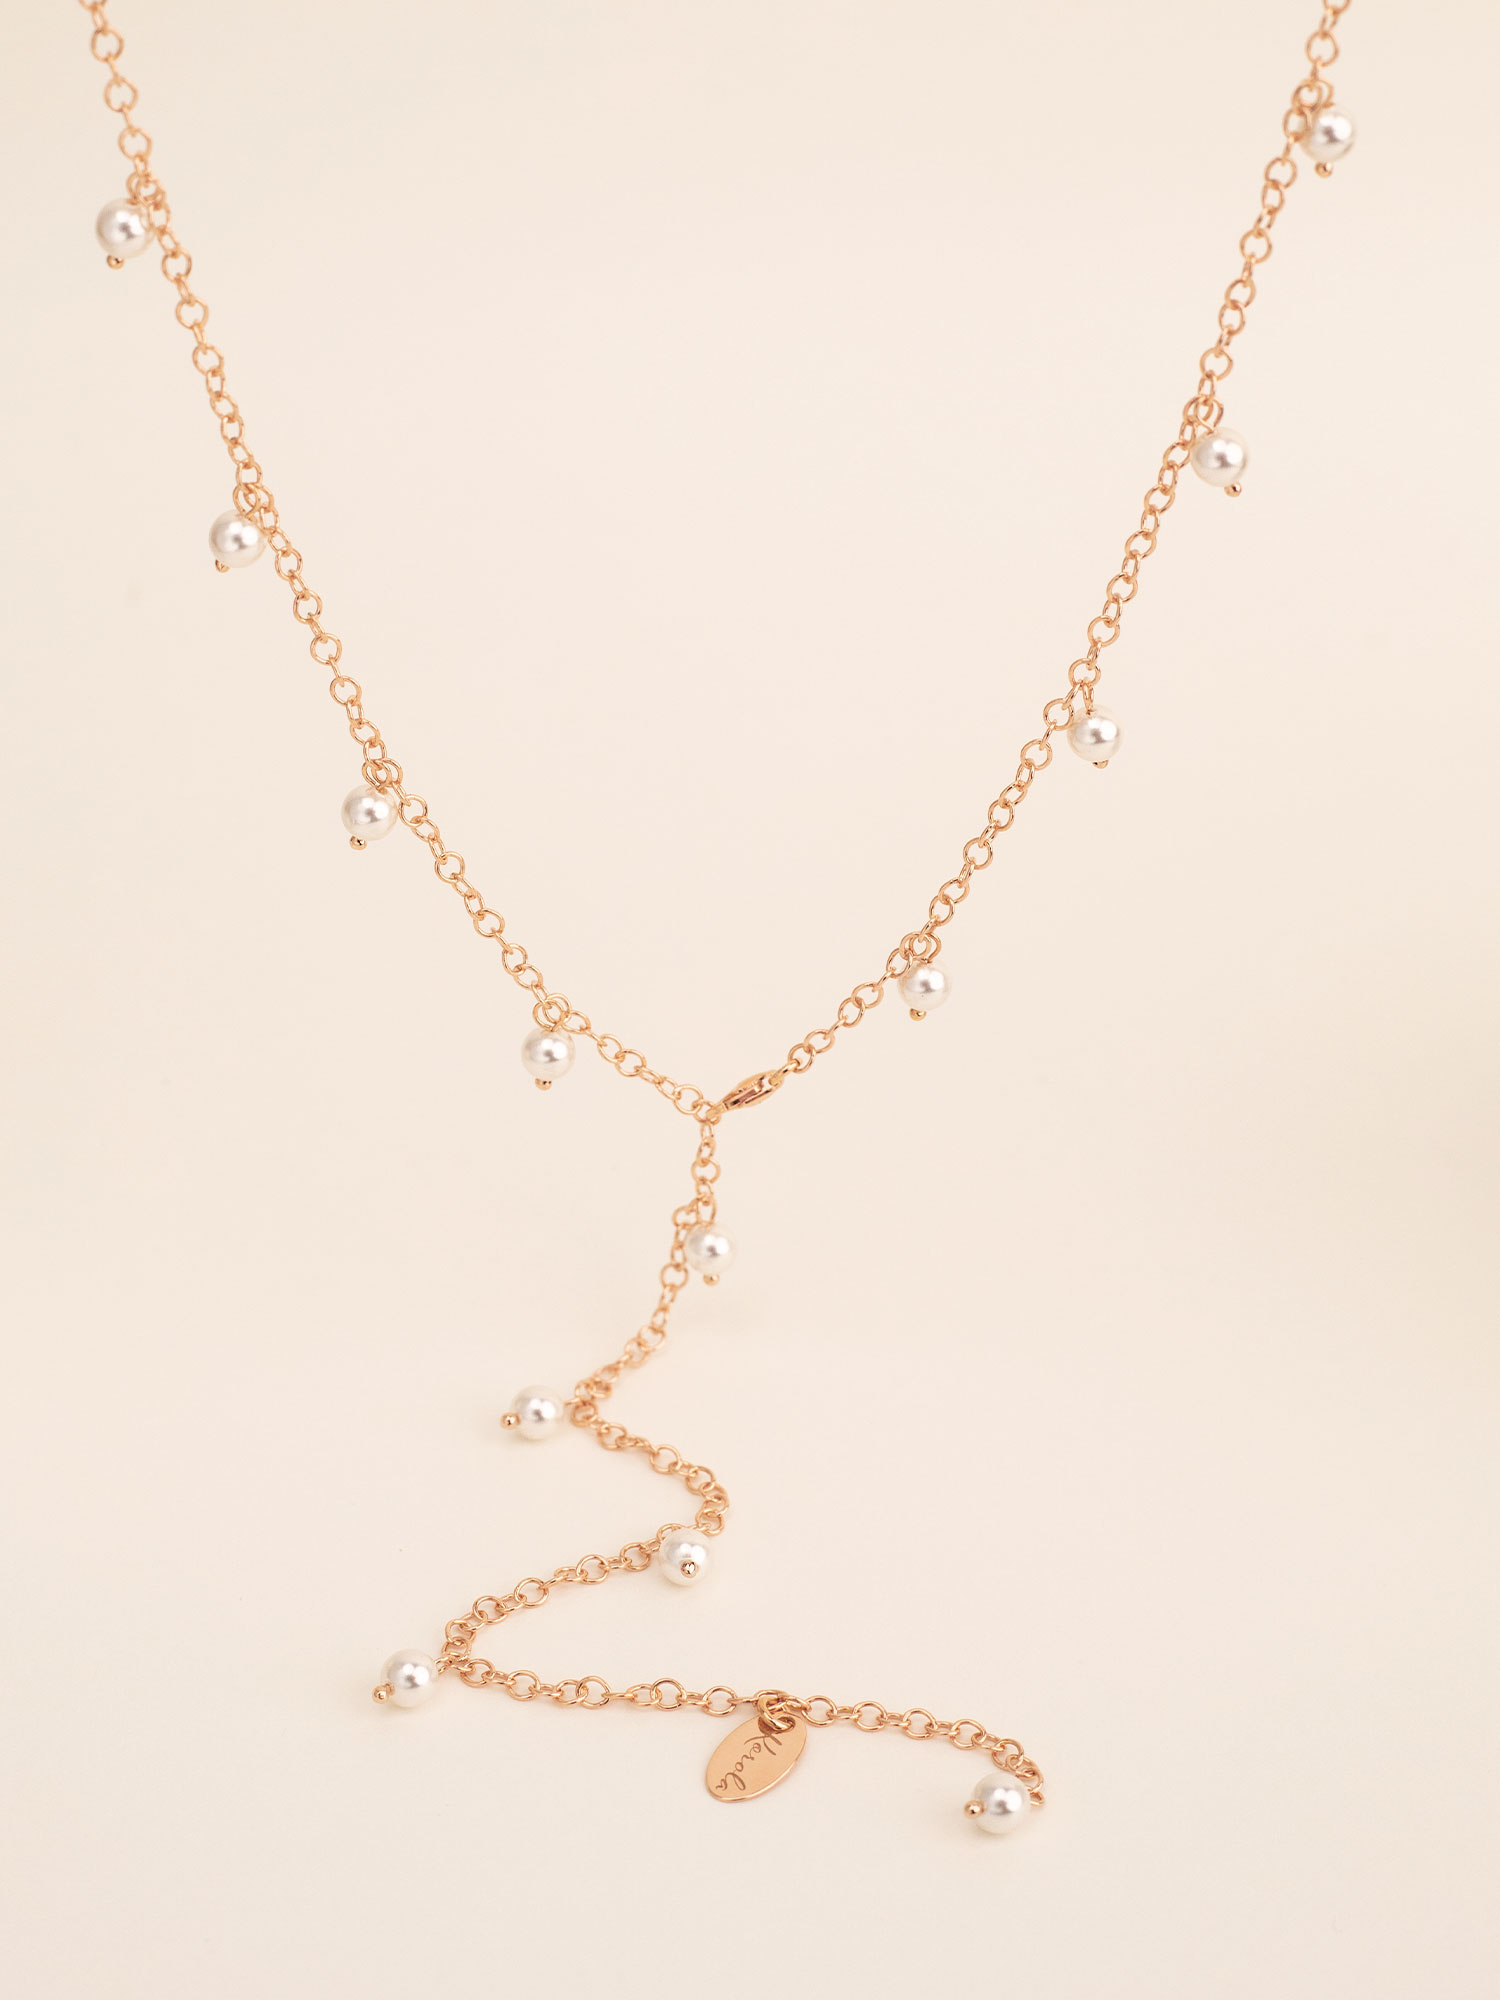 Long necklace with 5mm pearls – 65cm – white pearl